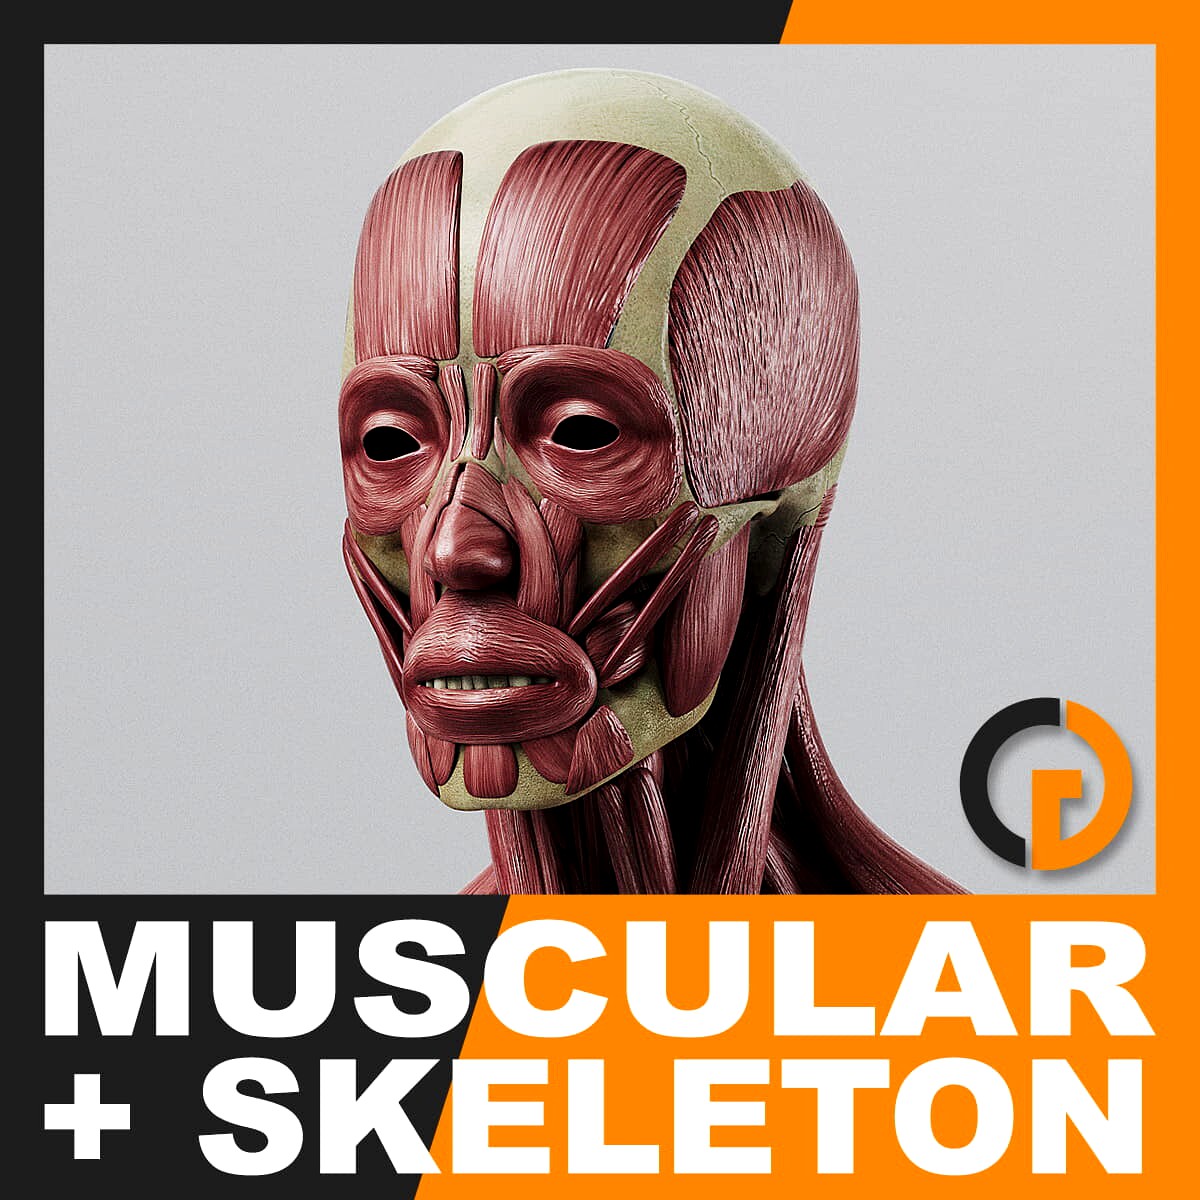 Human Muscular System and Skeleton - Anatomy